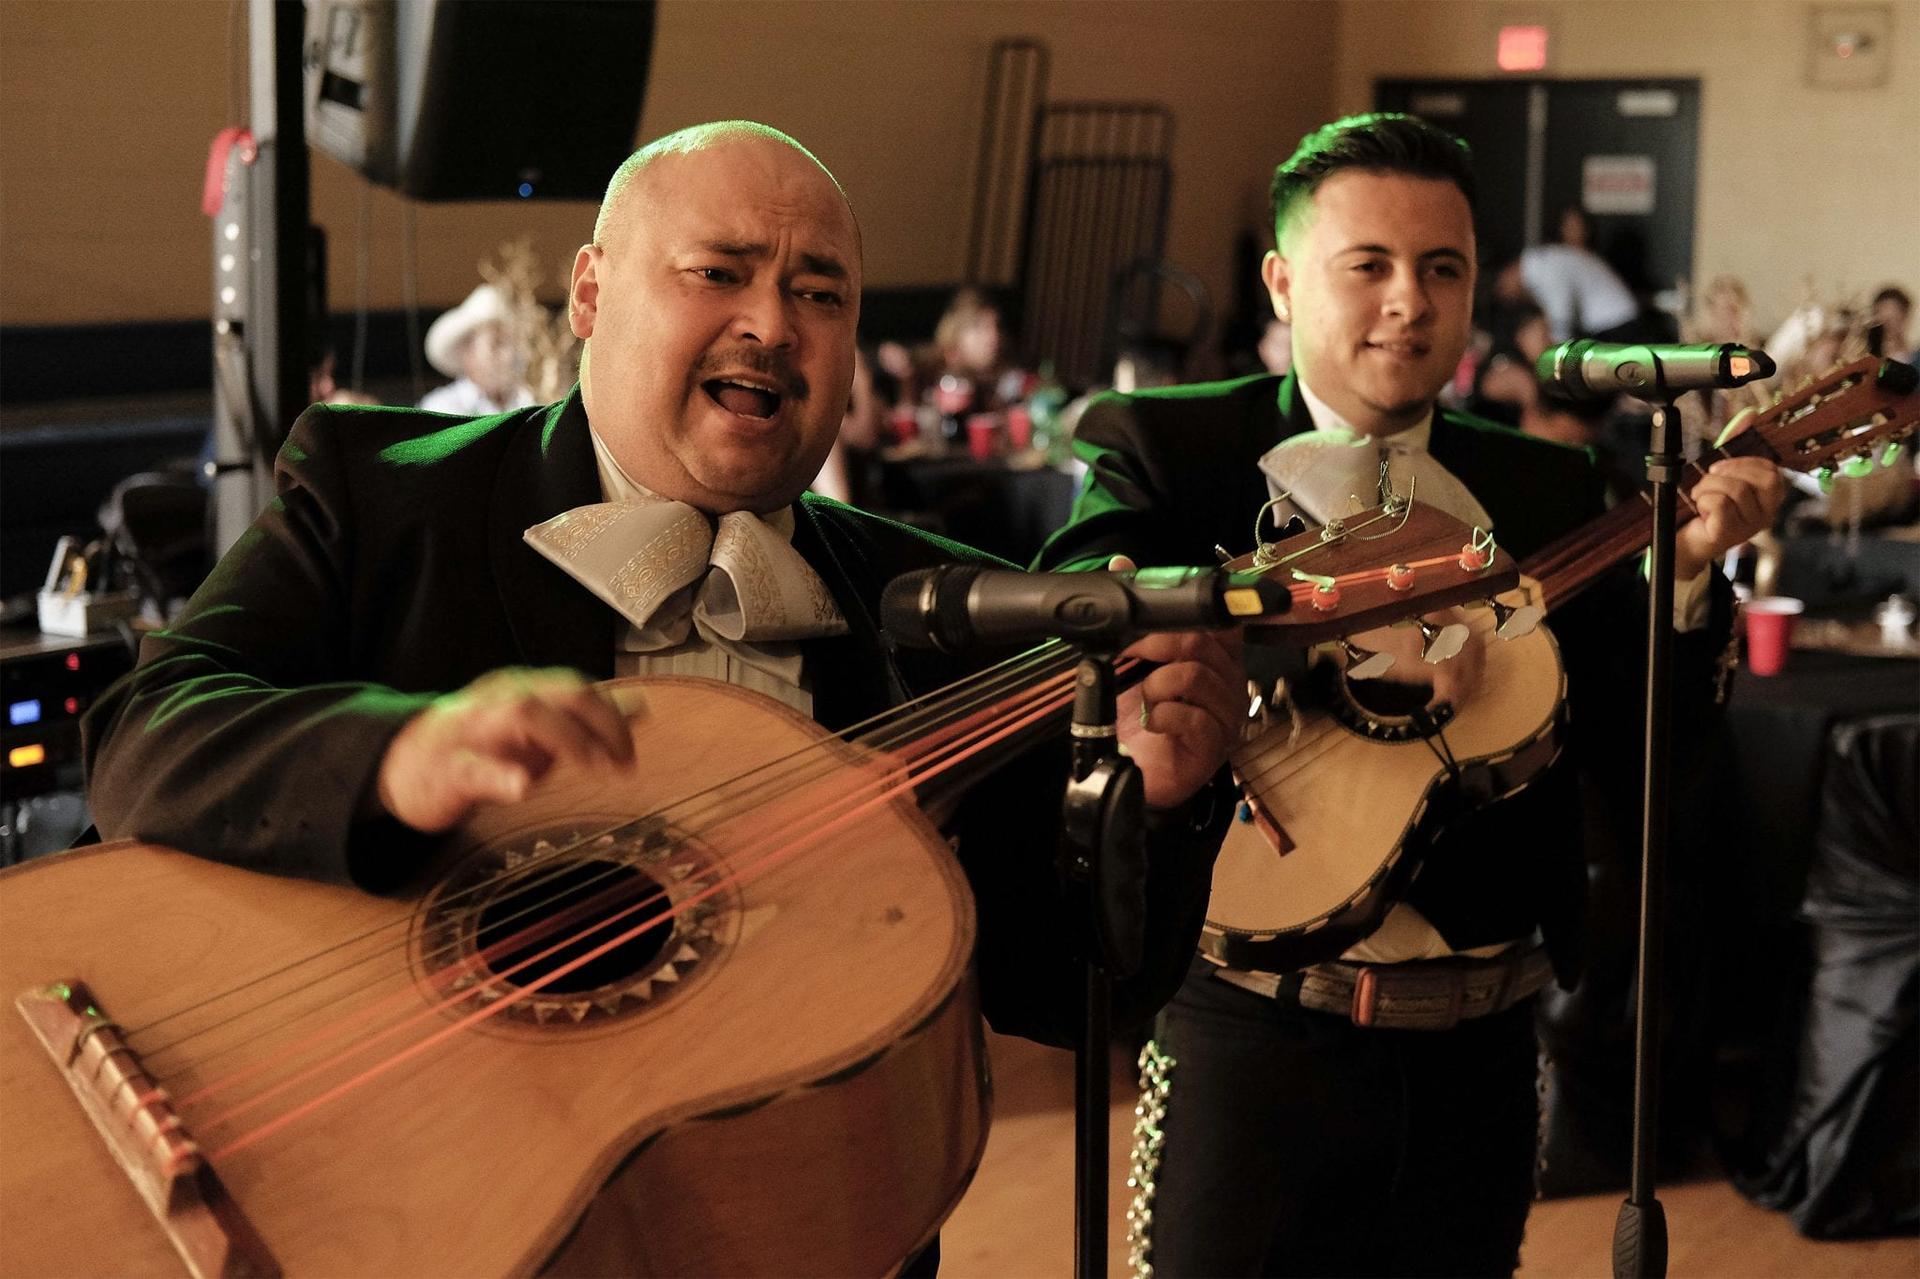 Mariachi musicians know where credit goes for their talent: to God